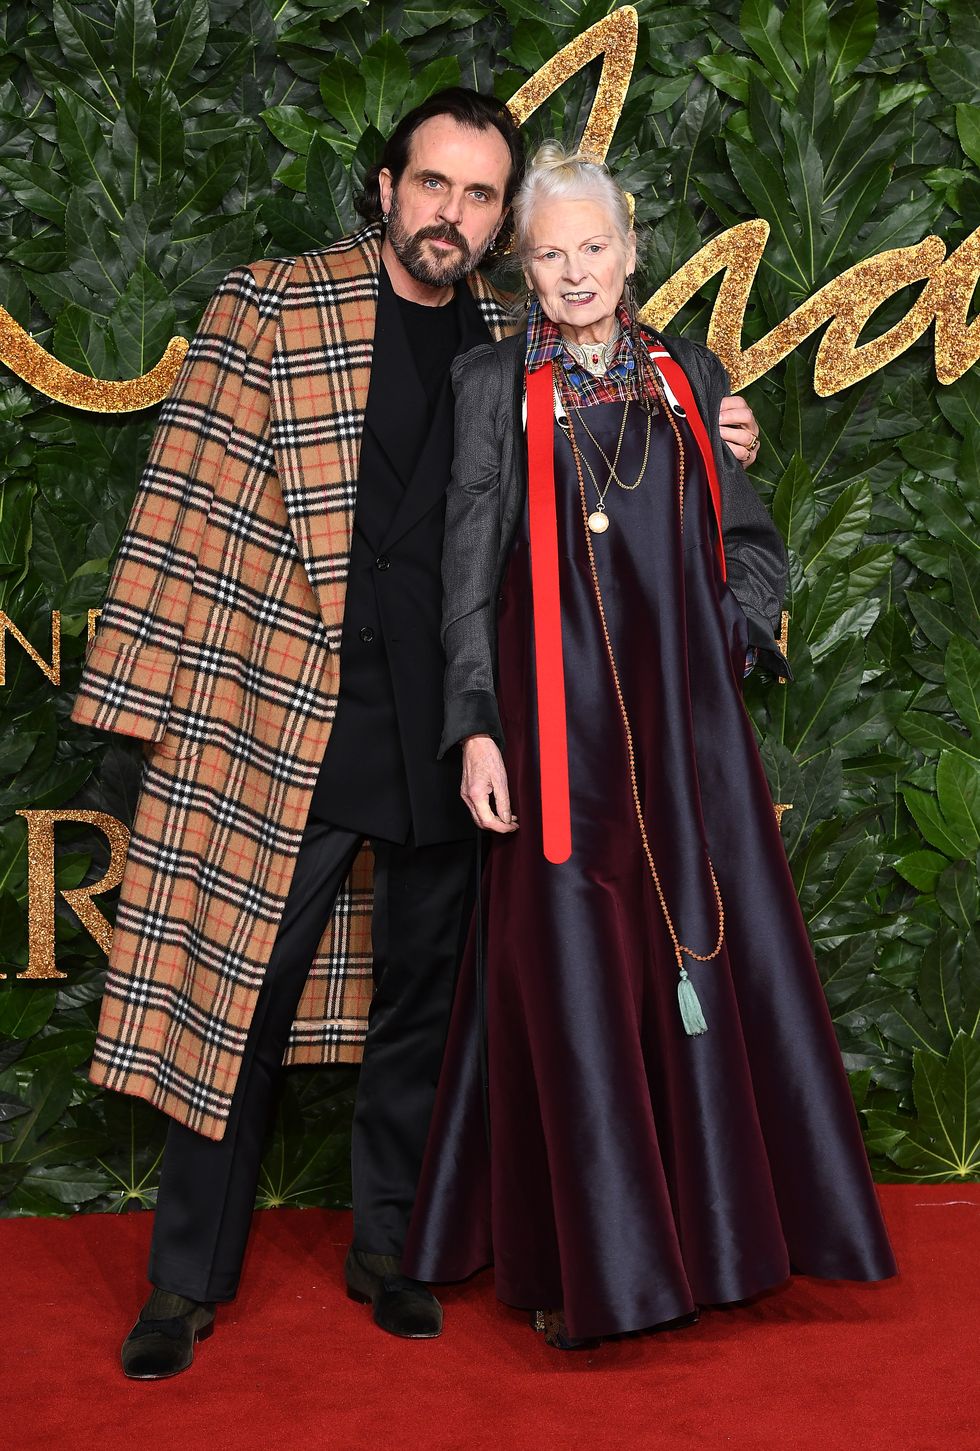 london, england   december 10  andreas kronthaler and vivienne westwood arrives at the fashion awards 2018 in partnership with swarovski at royal albert hall on december 10, 2018 in london, england  photo by jeff spicerbfcgetty images for bfc